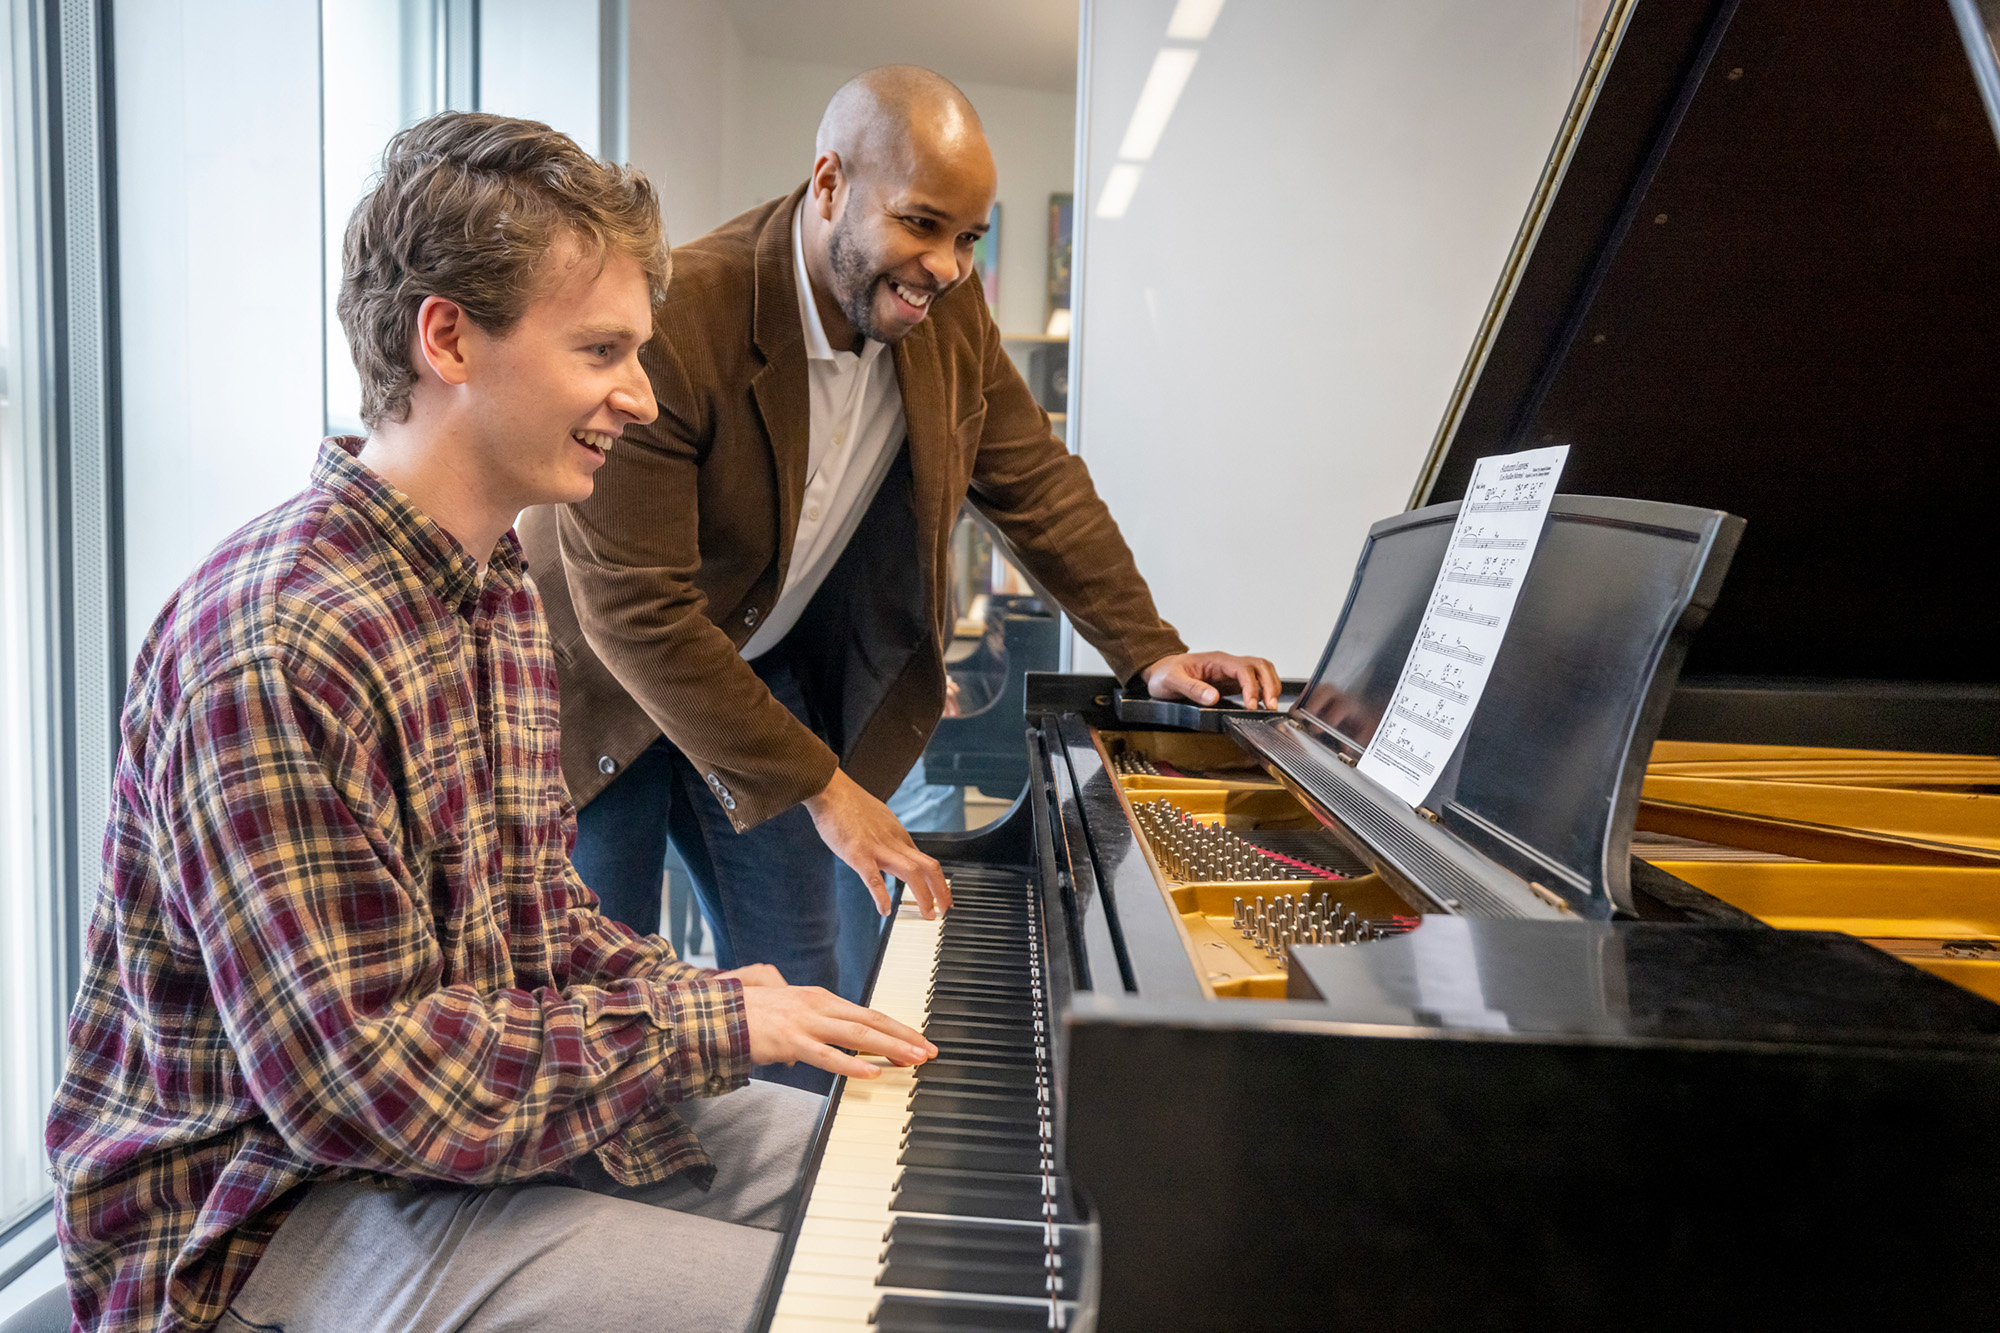 University of Iowa School of Music student Sean Harken plays the piano while faculty member William Menefield watches